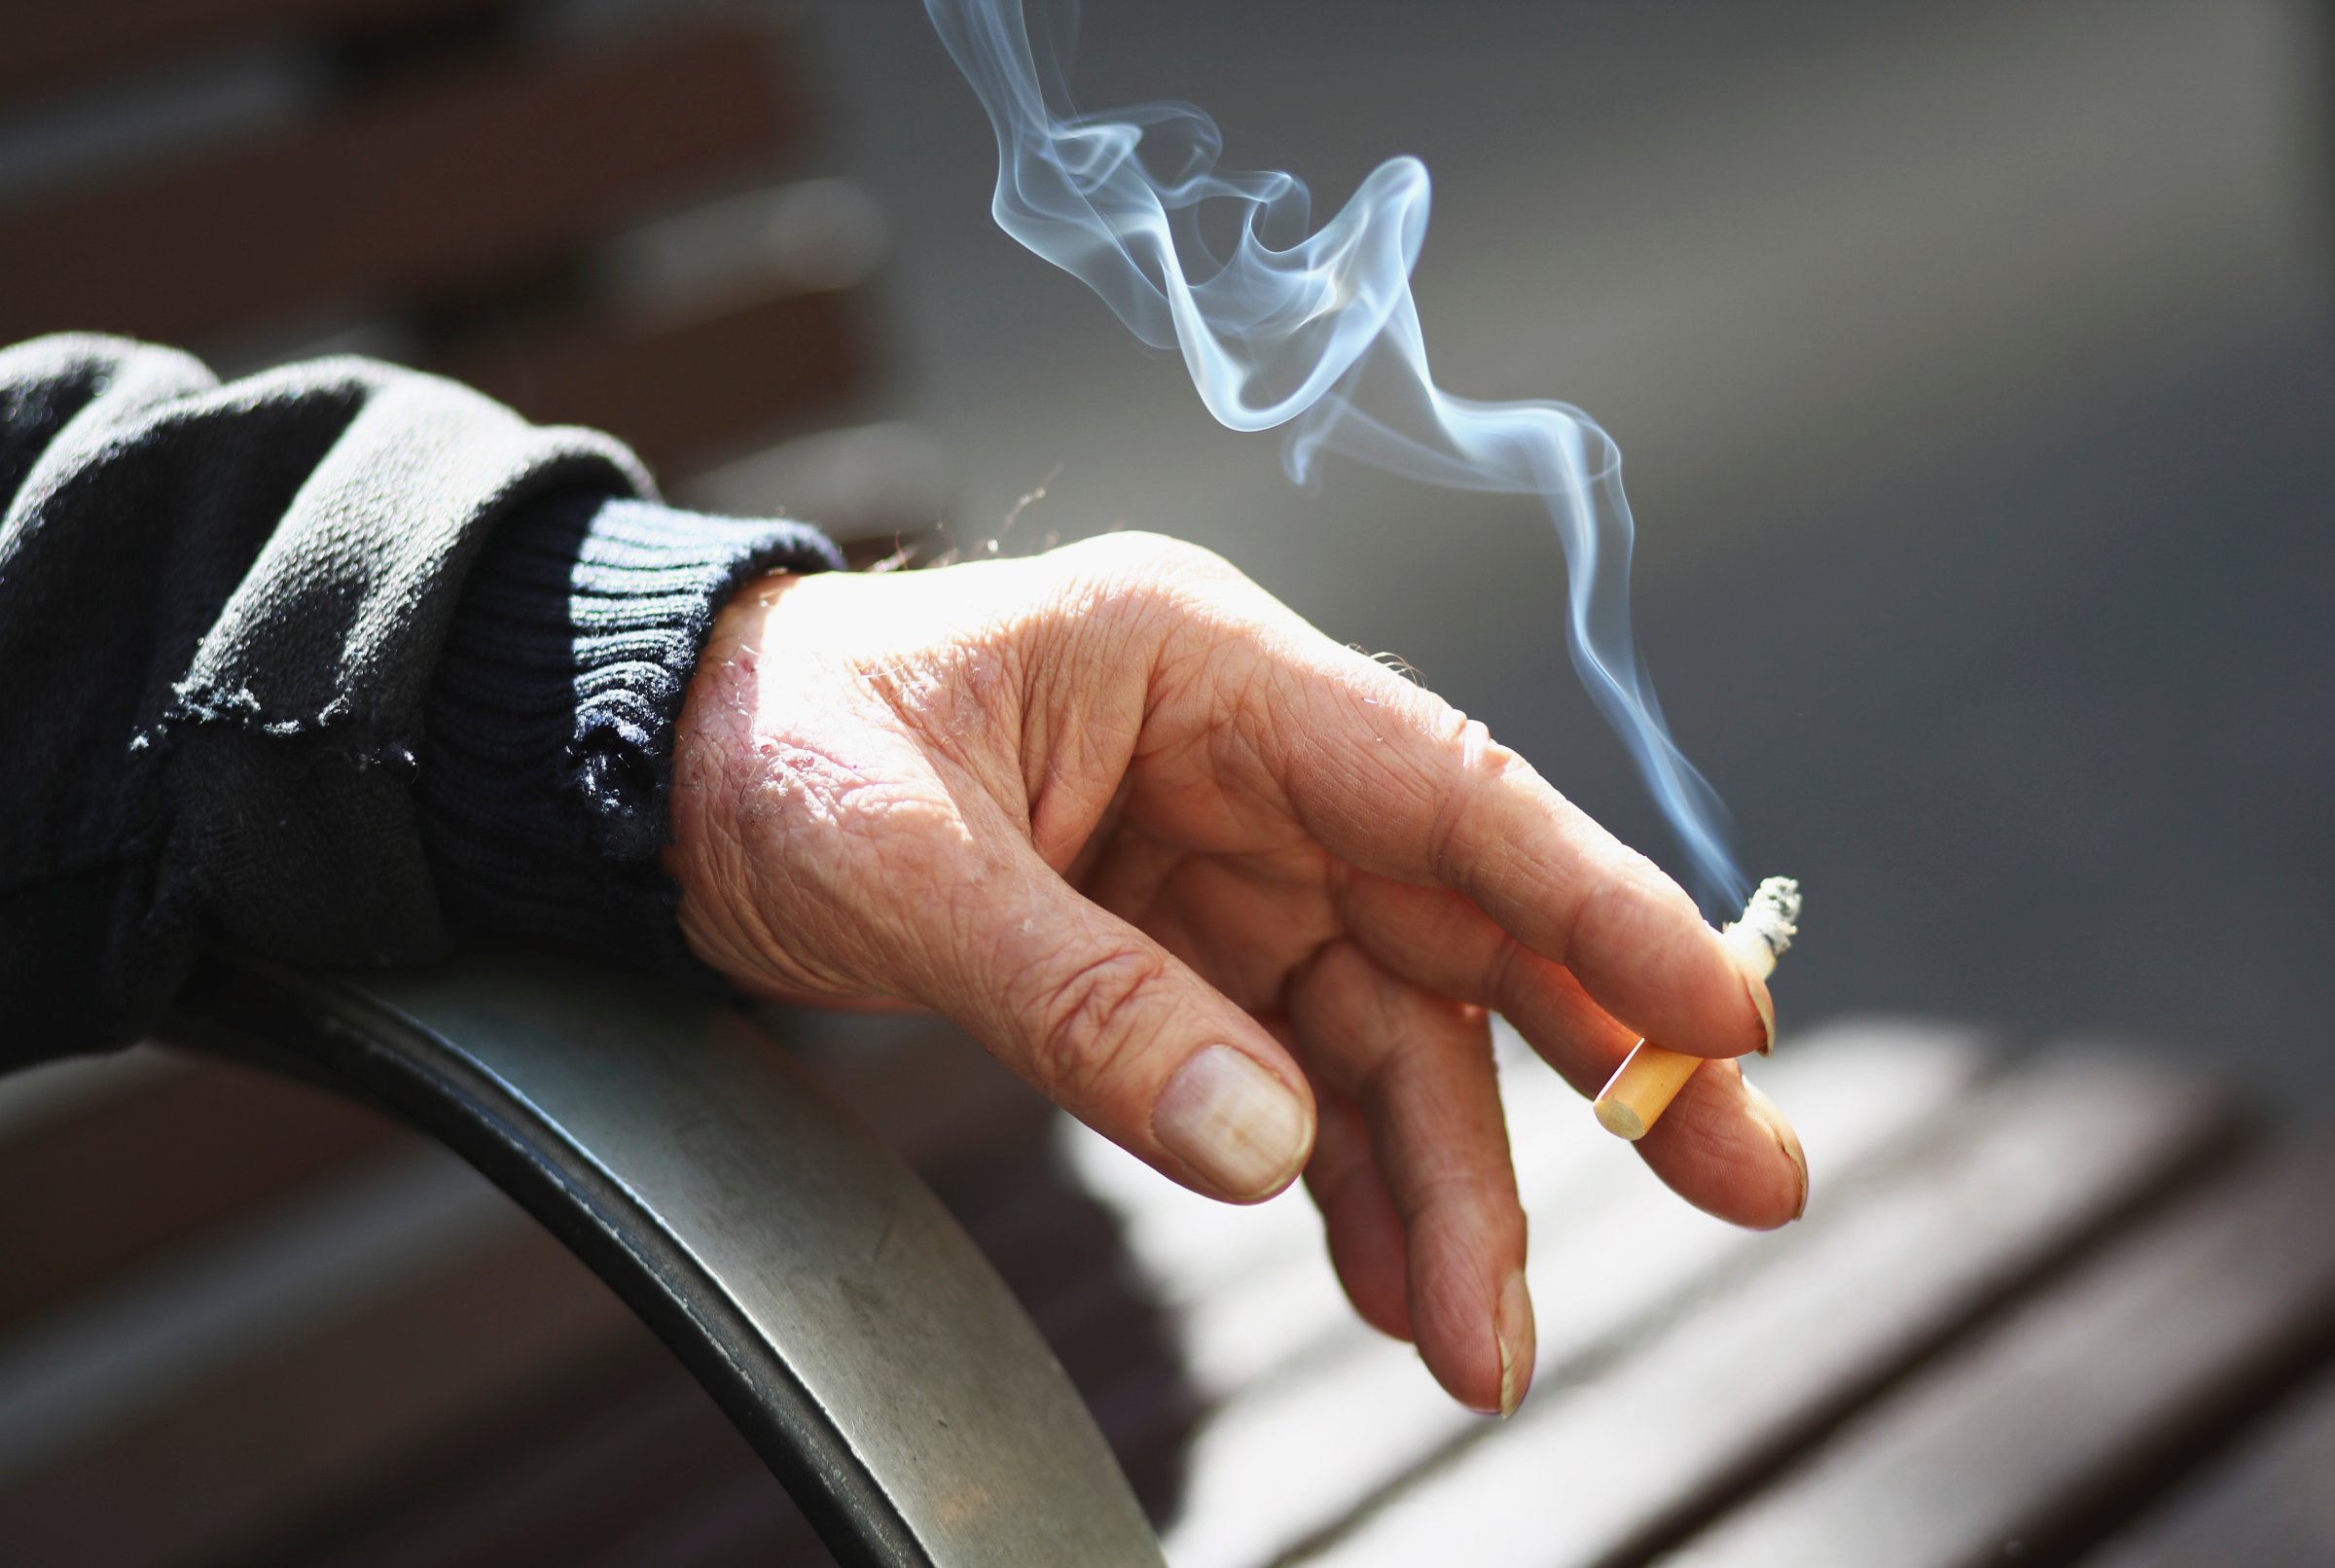 Smokers To Pay More For Cigarettes As Tobacco Tax Increases